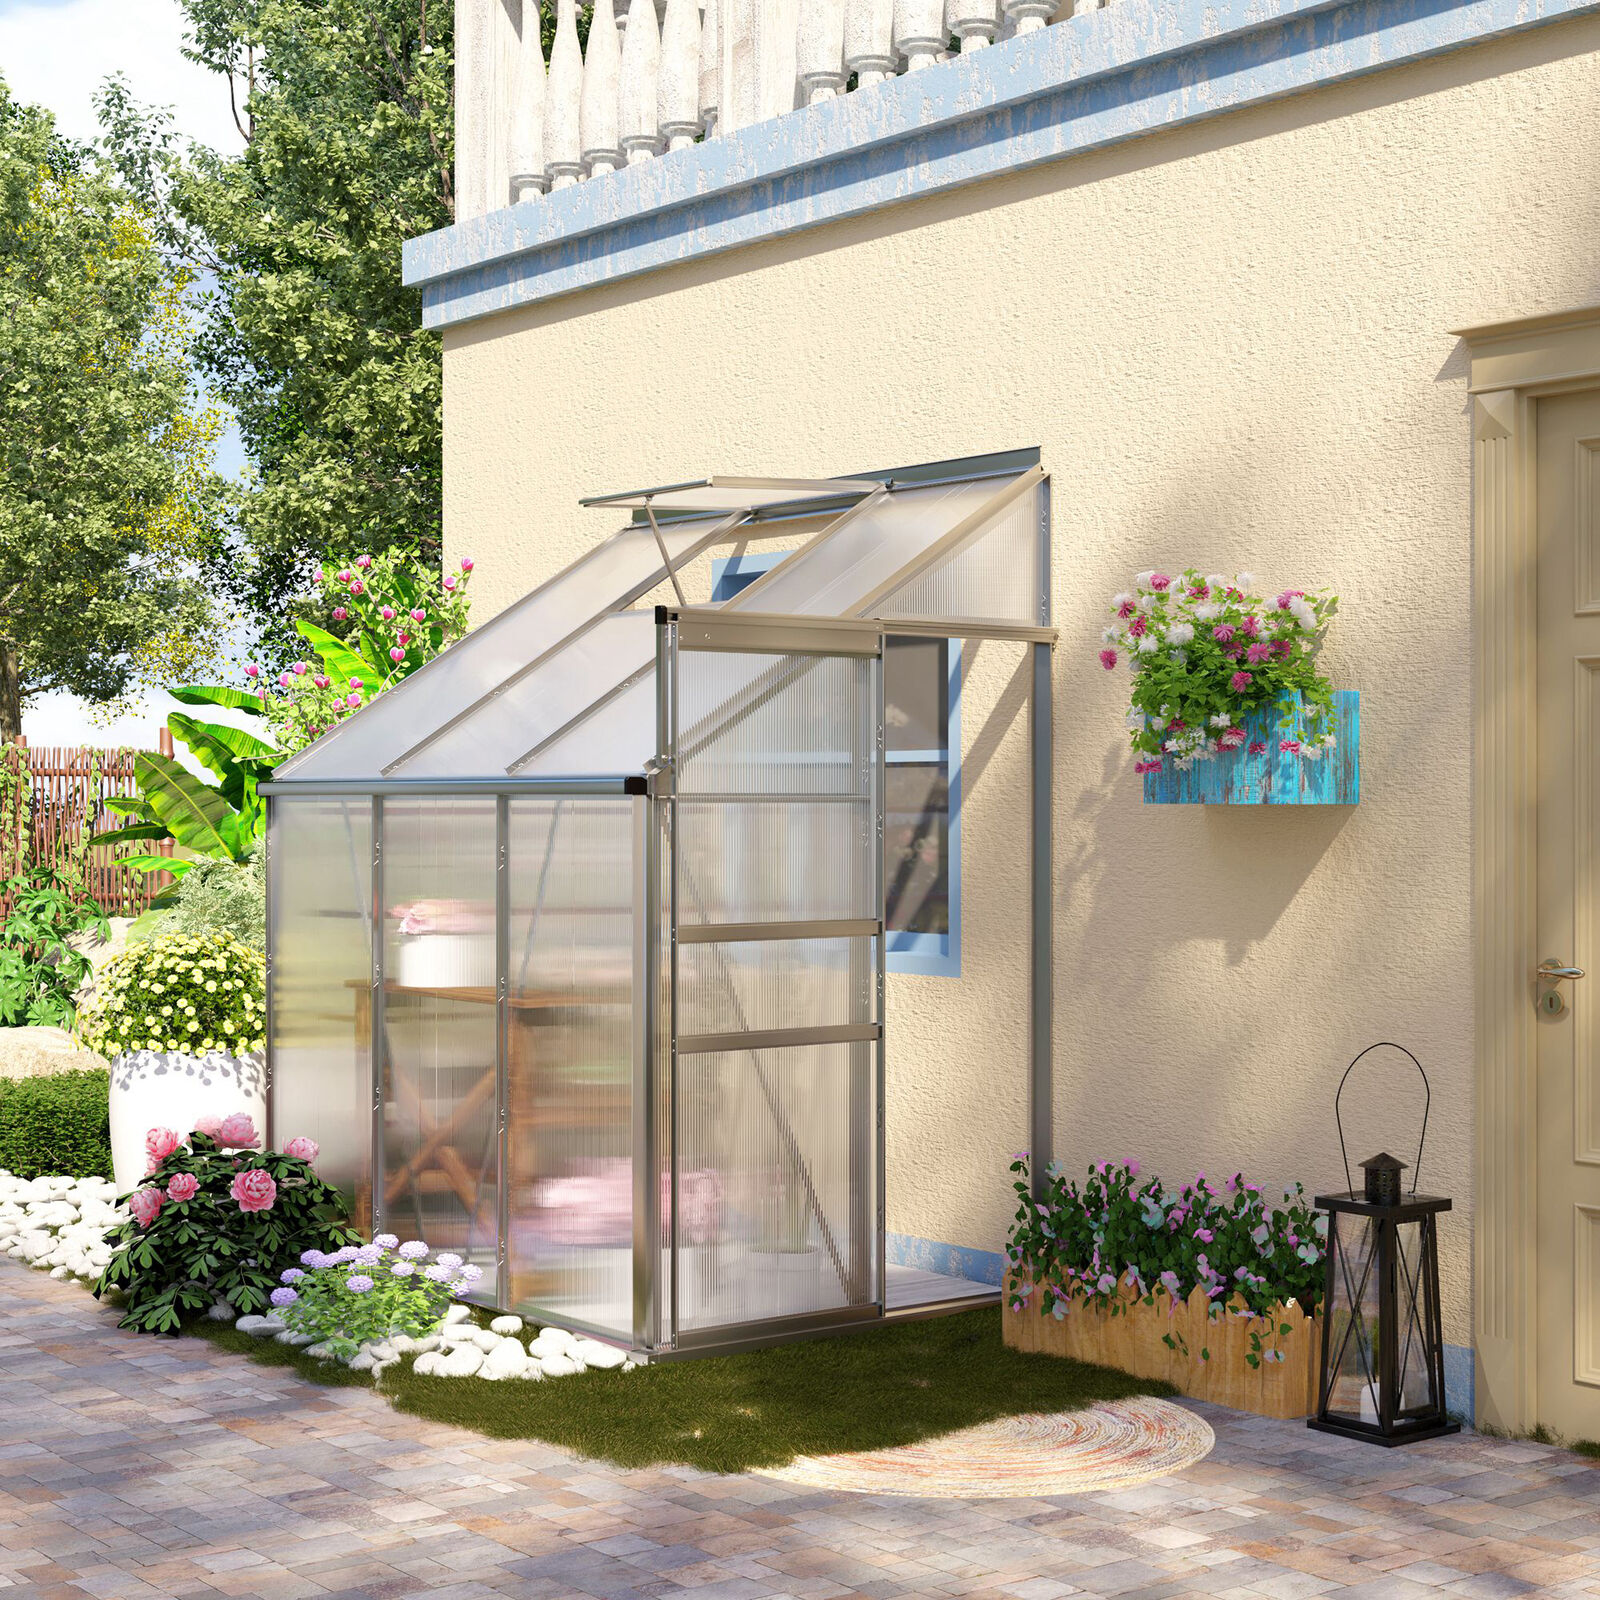 6\' x 4\' Walk-in Garden Polycarbonate Greenhouse Kit w/ Adjustable Vent, Clear